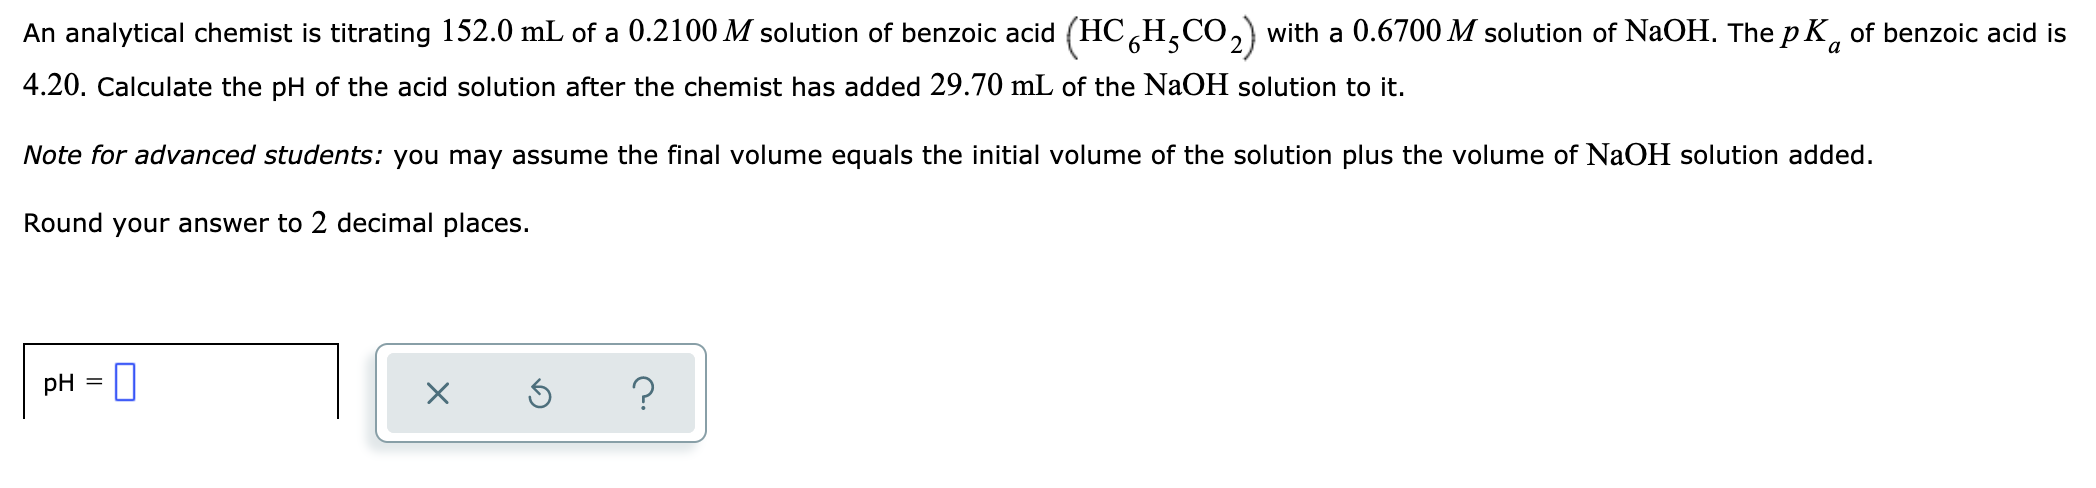 An analytical chemist is titrating 152.0 mL of a 0.2100 M solution of benzoic acid (HCH,CO,) with a 0.6700 M solution of NaOH. The p K, of benzoic acid is
4.20. Calculate the pH of the acid solution after the chemist has added 29.70 mL of the NaOH solution to it.
